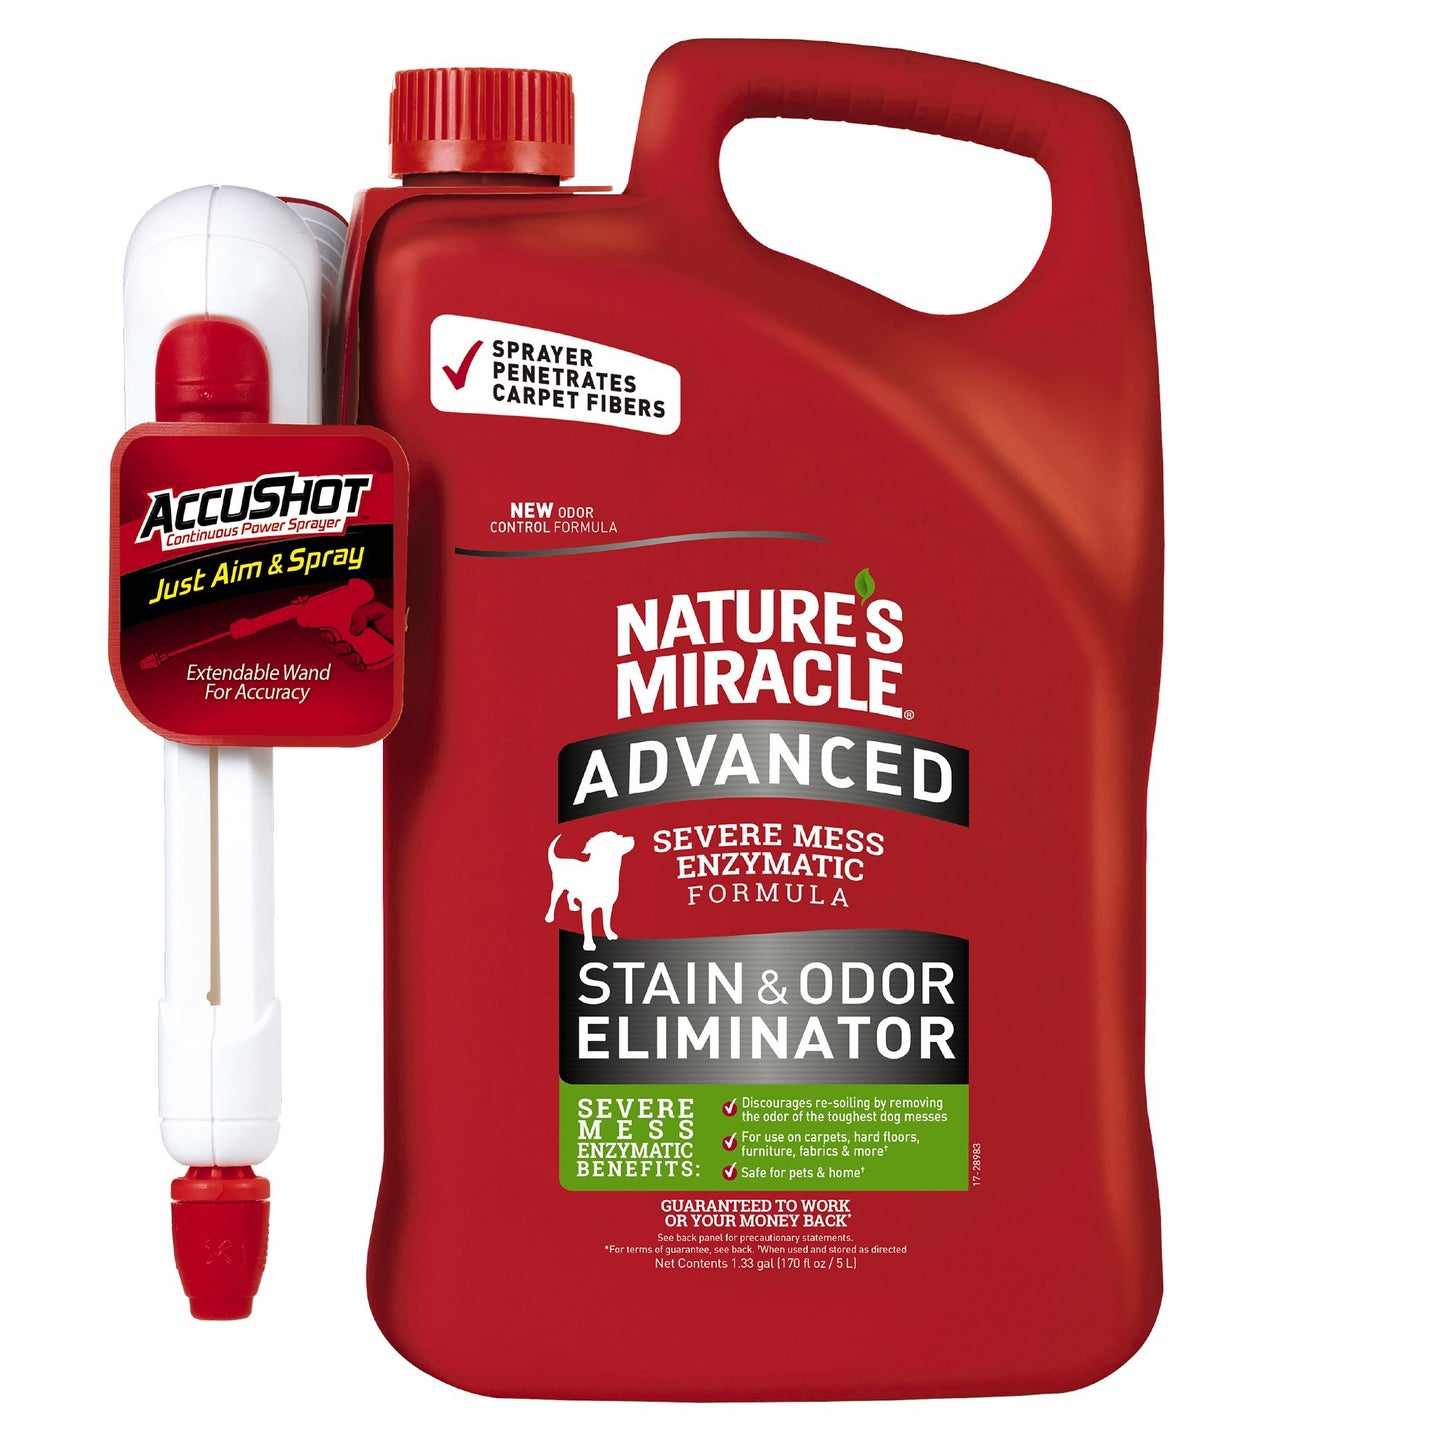 Nature's Miracle Advanced Stain and Odor Remover AccuShot